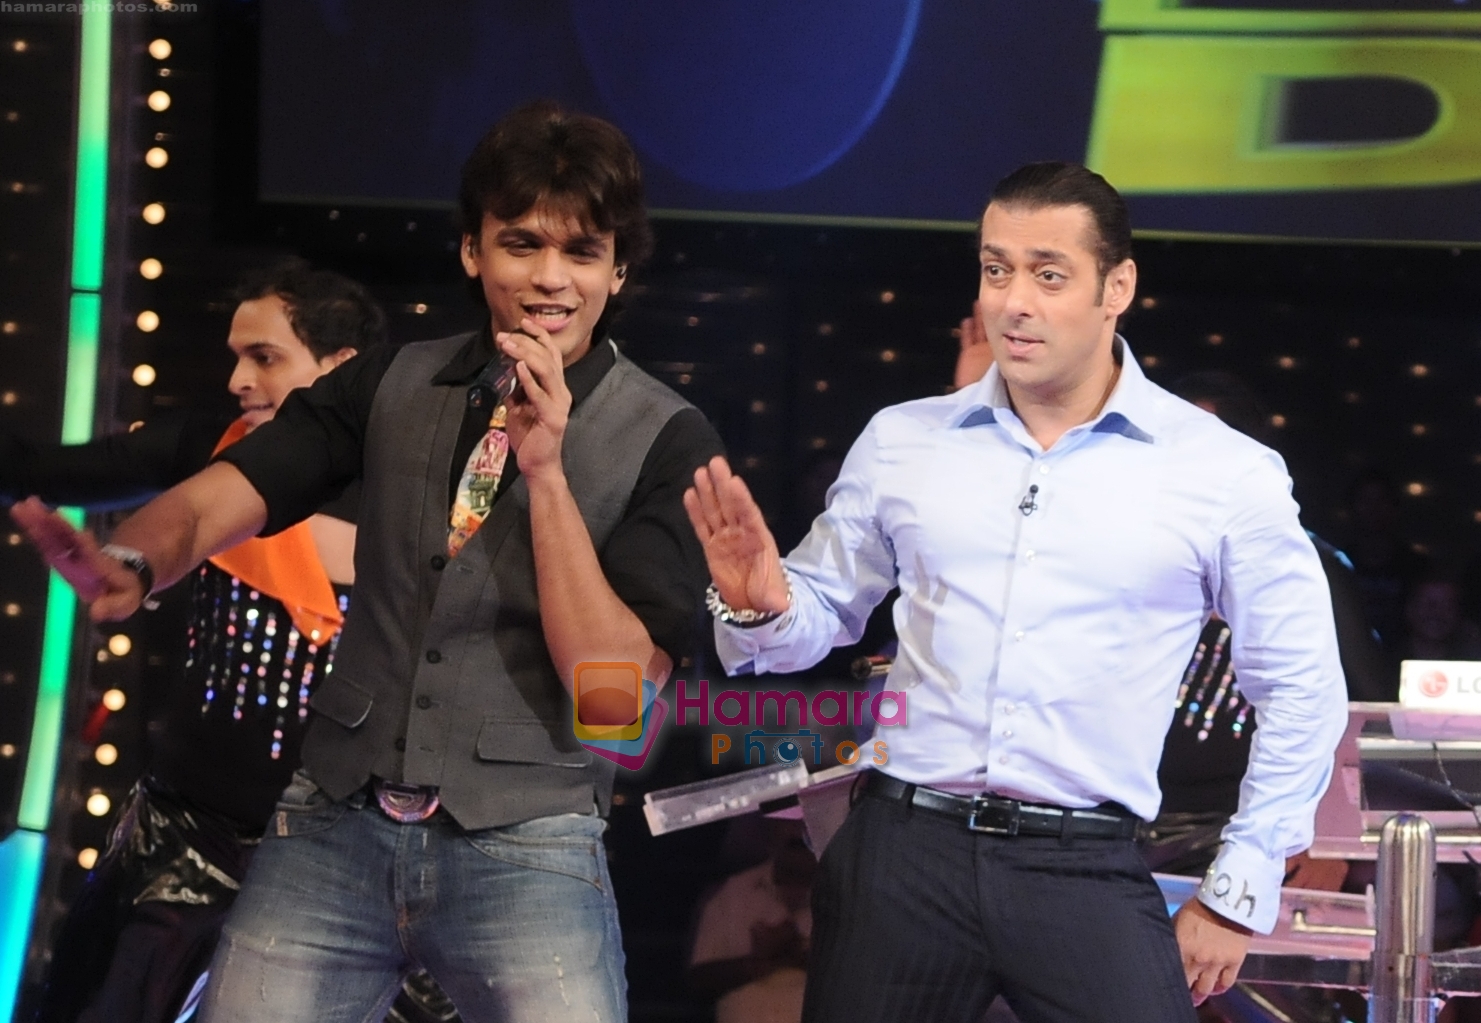 Abhijeet Sawant and Salman Khan at the Grand Finale of 10 Ka Dum on Oct 17, 2009 at 9.00 P.M.Only on Sony Entertainment Television